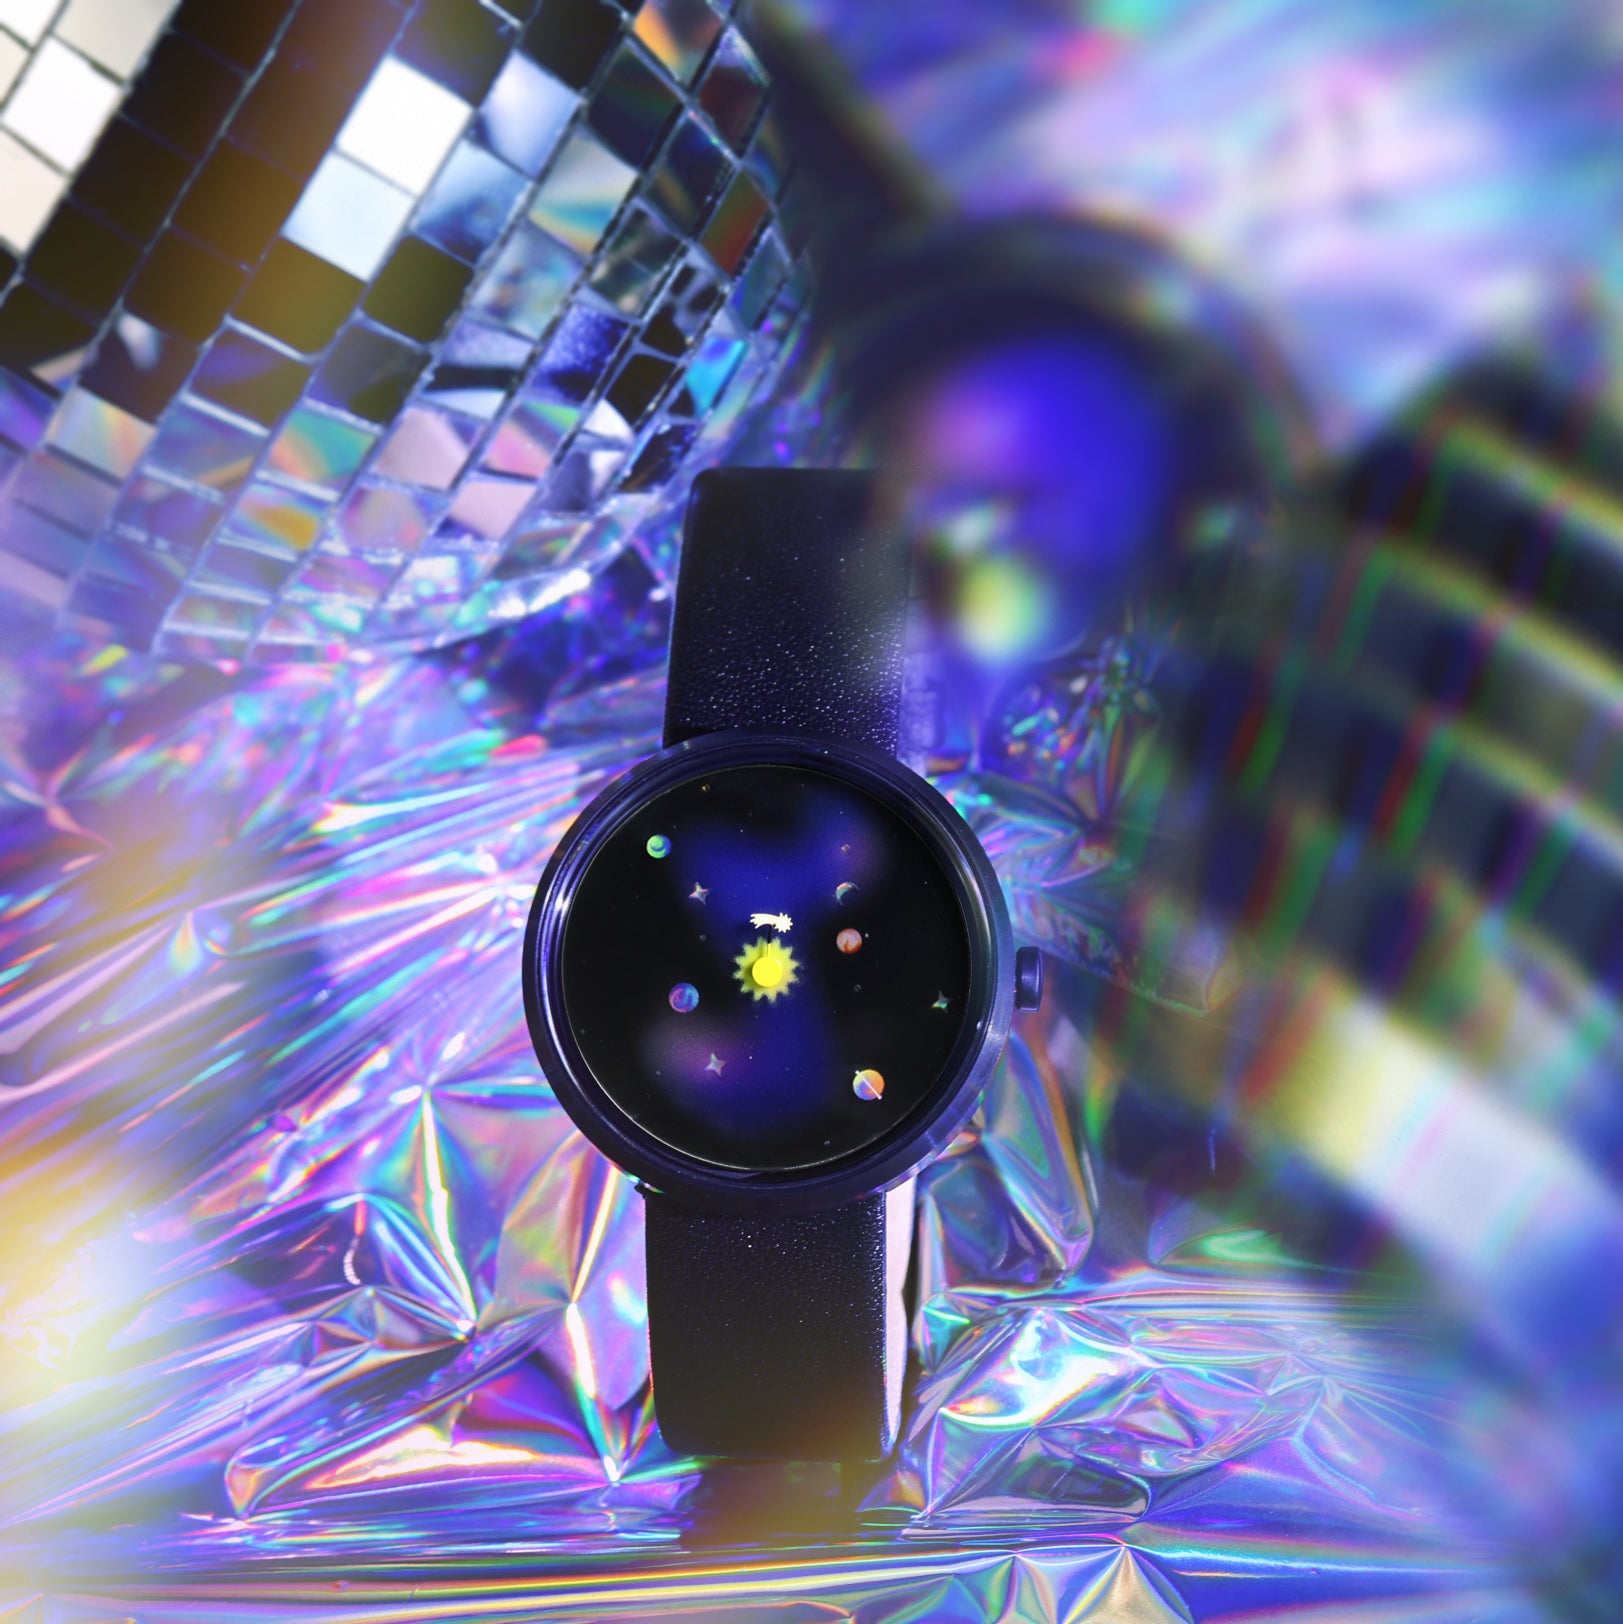 Zero Lifestyle - Navigate through galaxies of possibilities effortlessly.  Luna not only adorns your wrist but listens and responds, making every  interaction a smooth one. #Zerolifestyle #StartAtZero #AndNeverStop  #smartwatches #smartfashion #techtrends ...